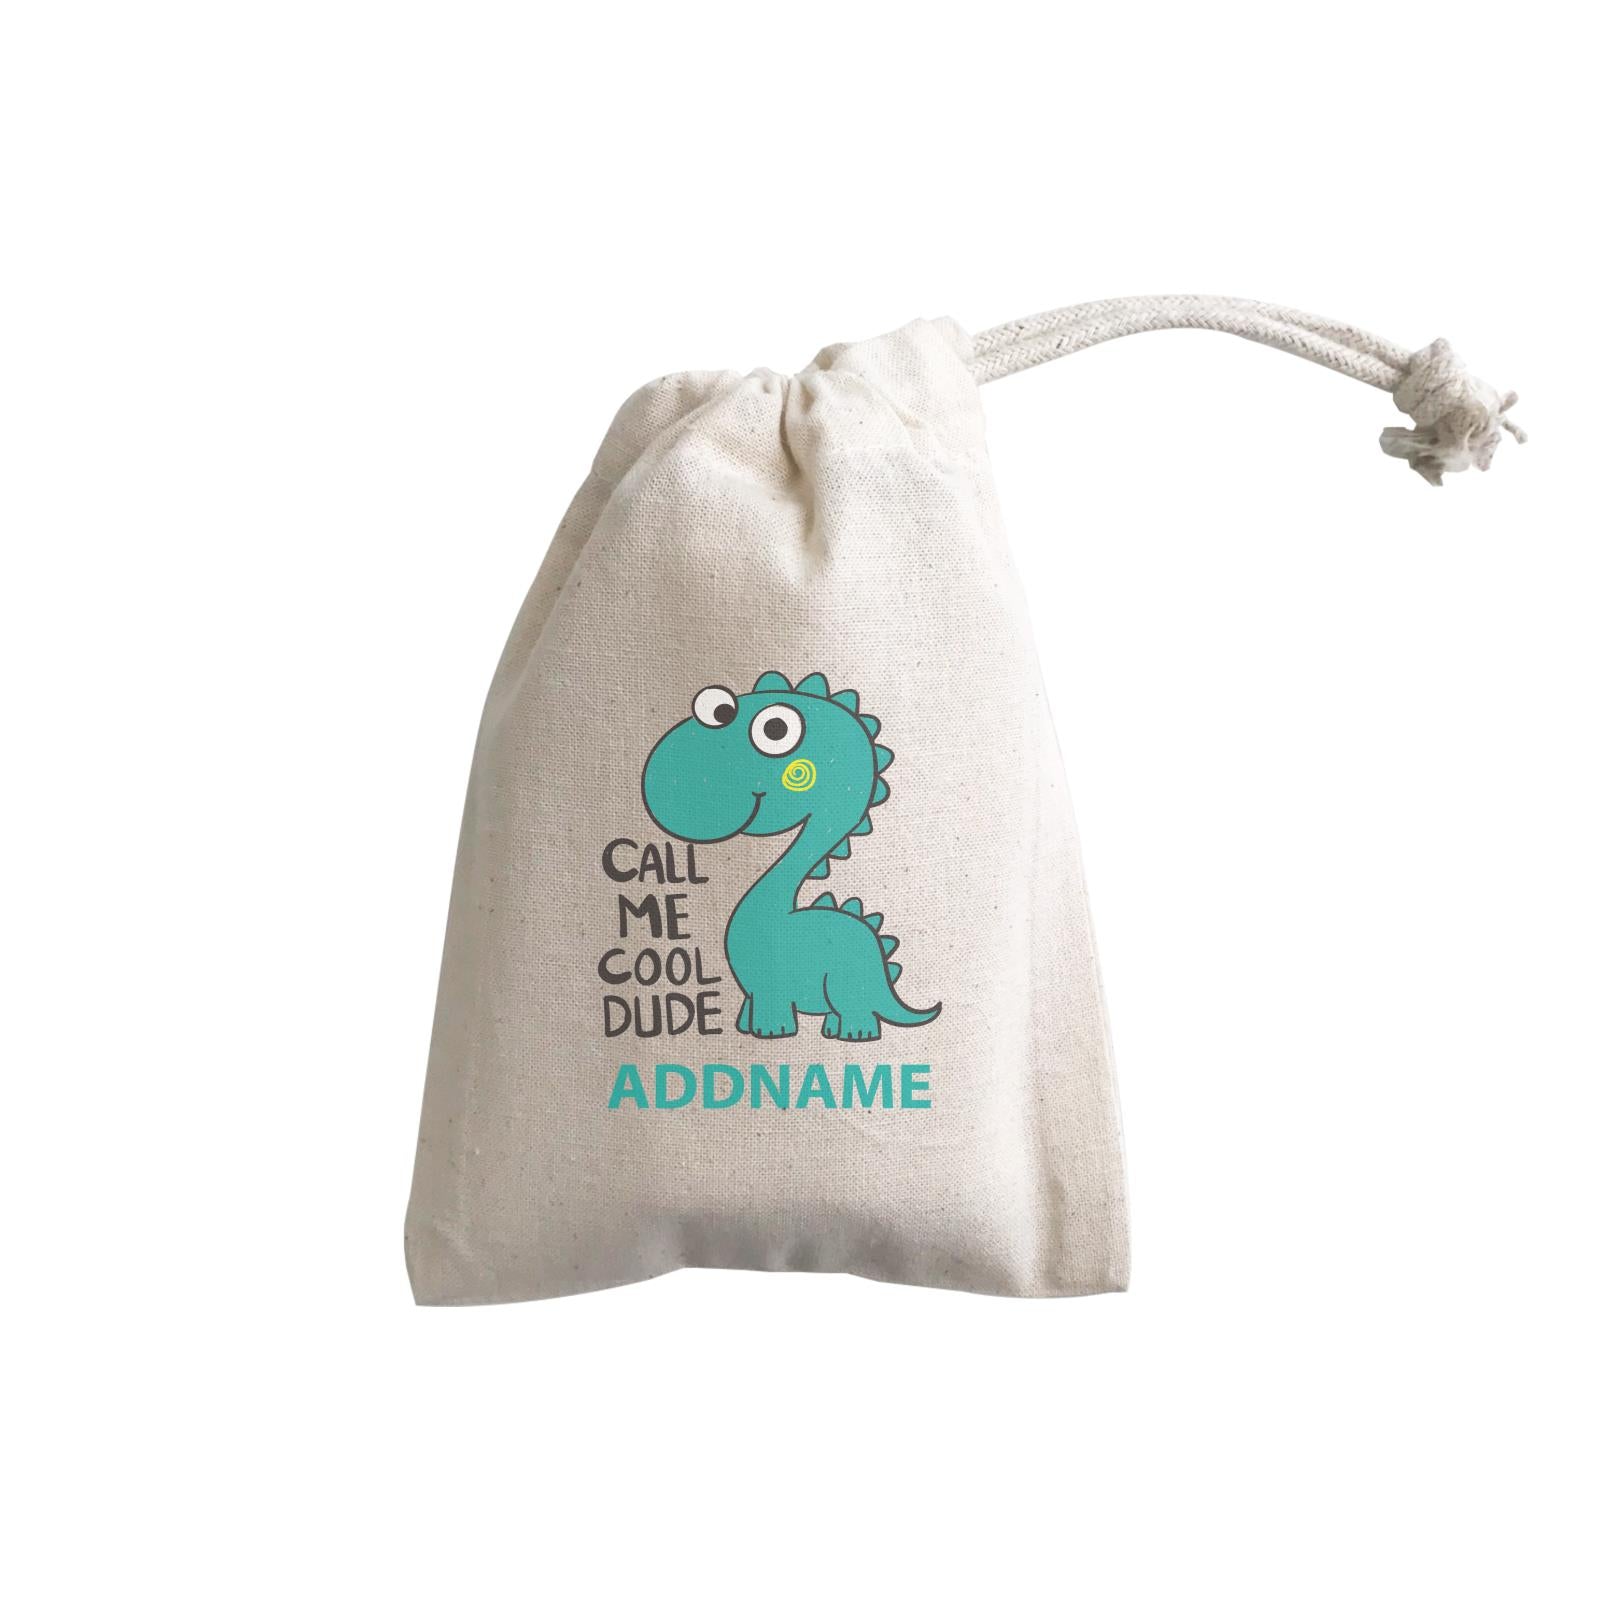 Cool Cute Dinosaur Call Me Cool Dude Addname GP Gift Pouch